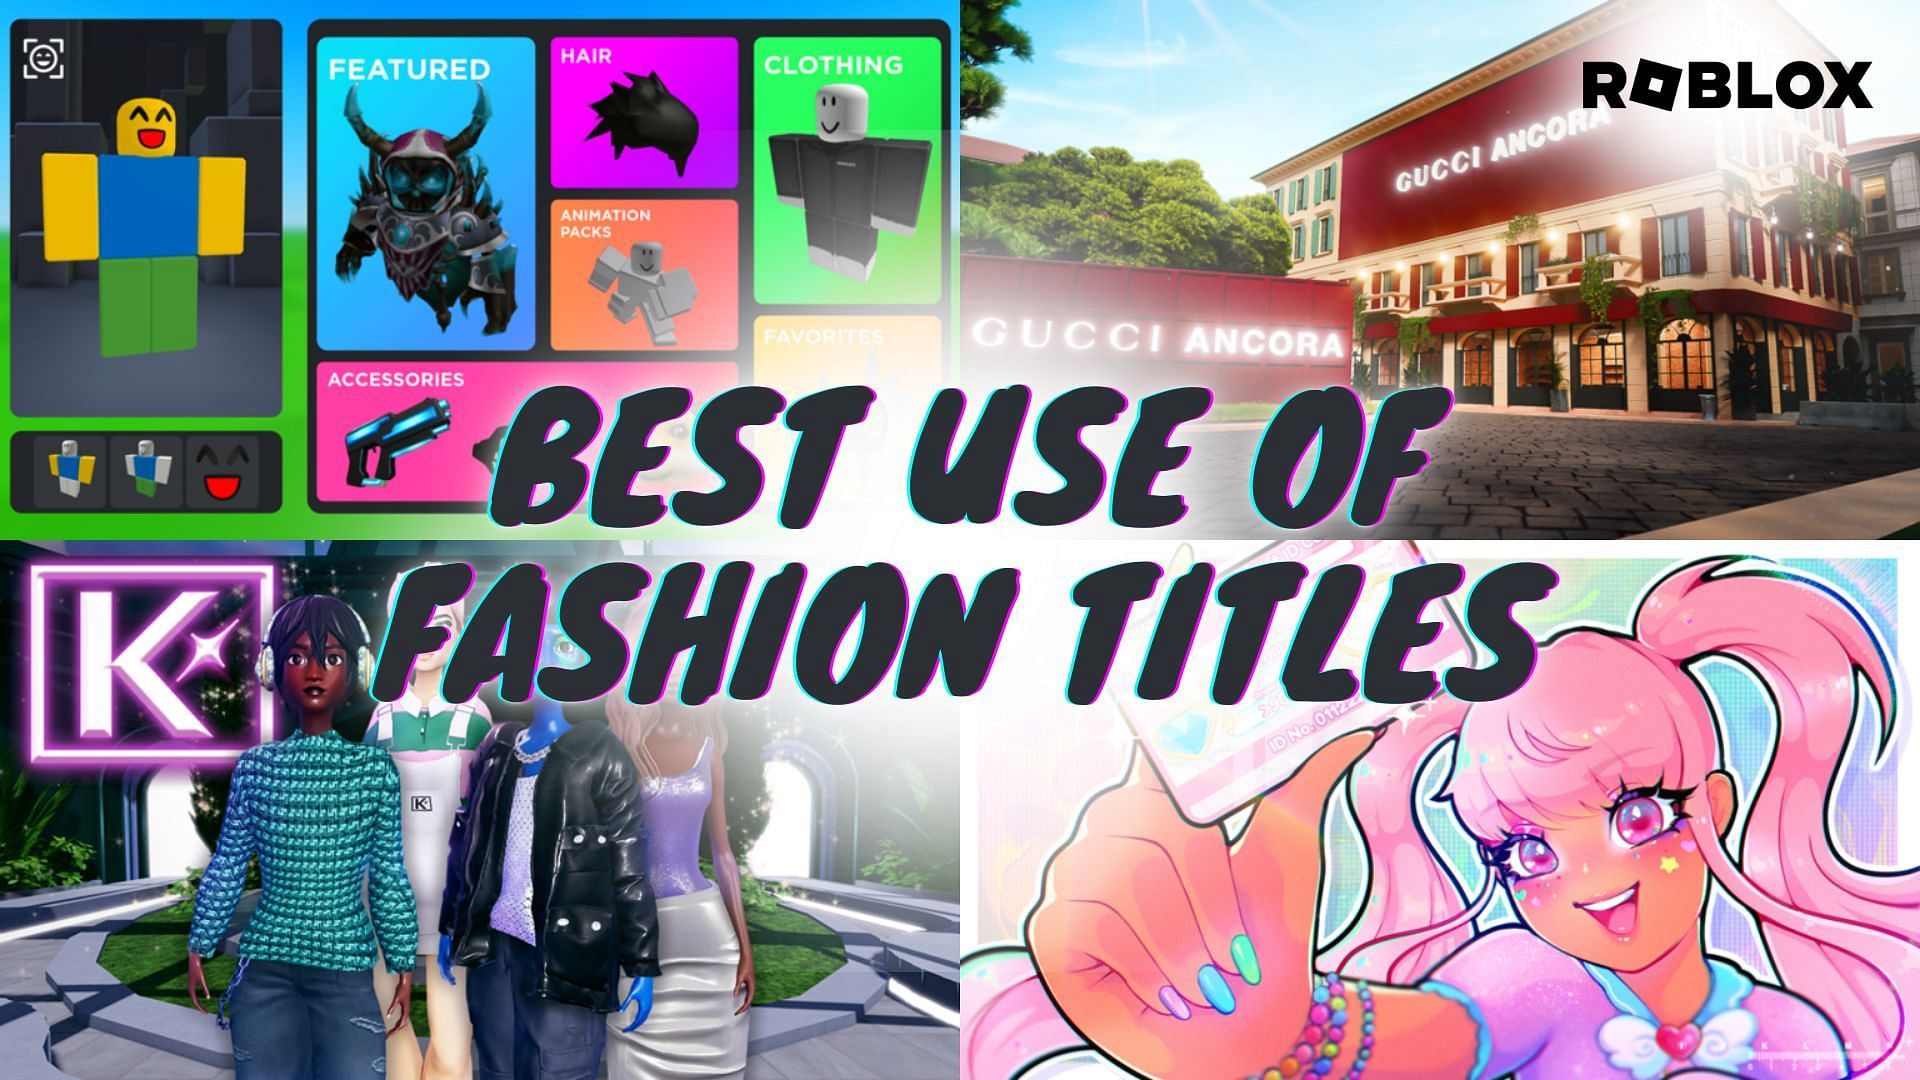 Roblox Innovation Awards 2023 Best Use of Fashion nominees